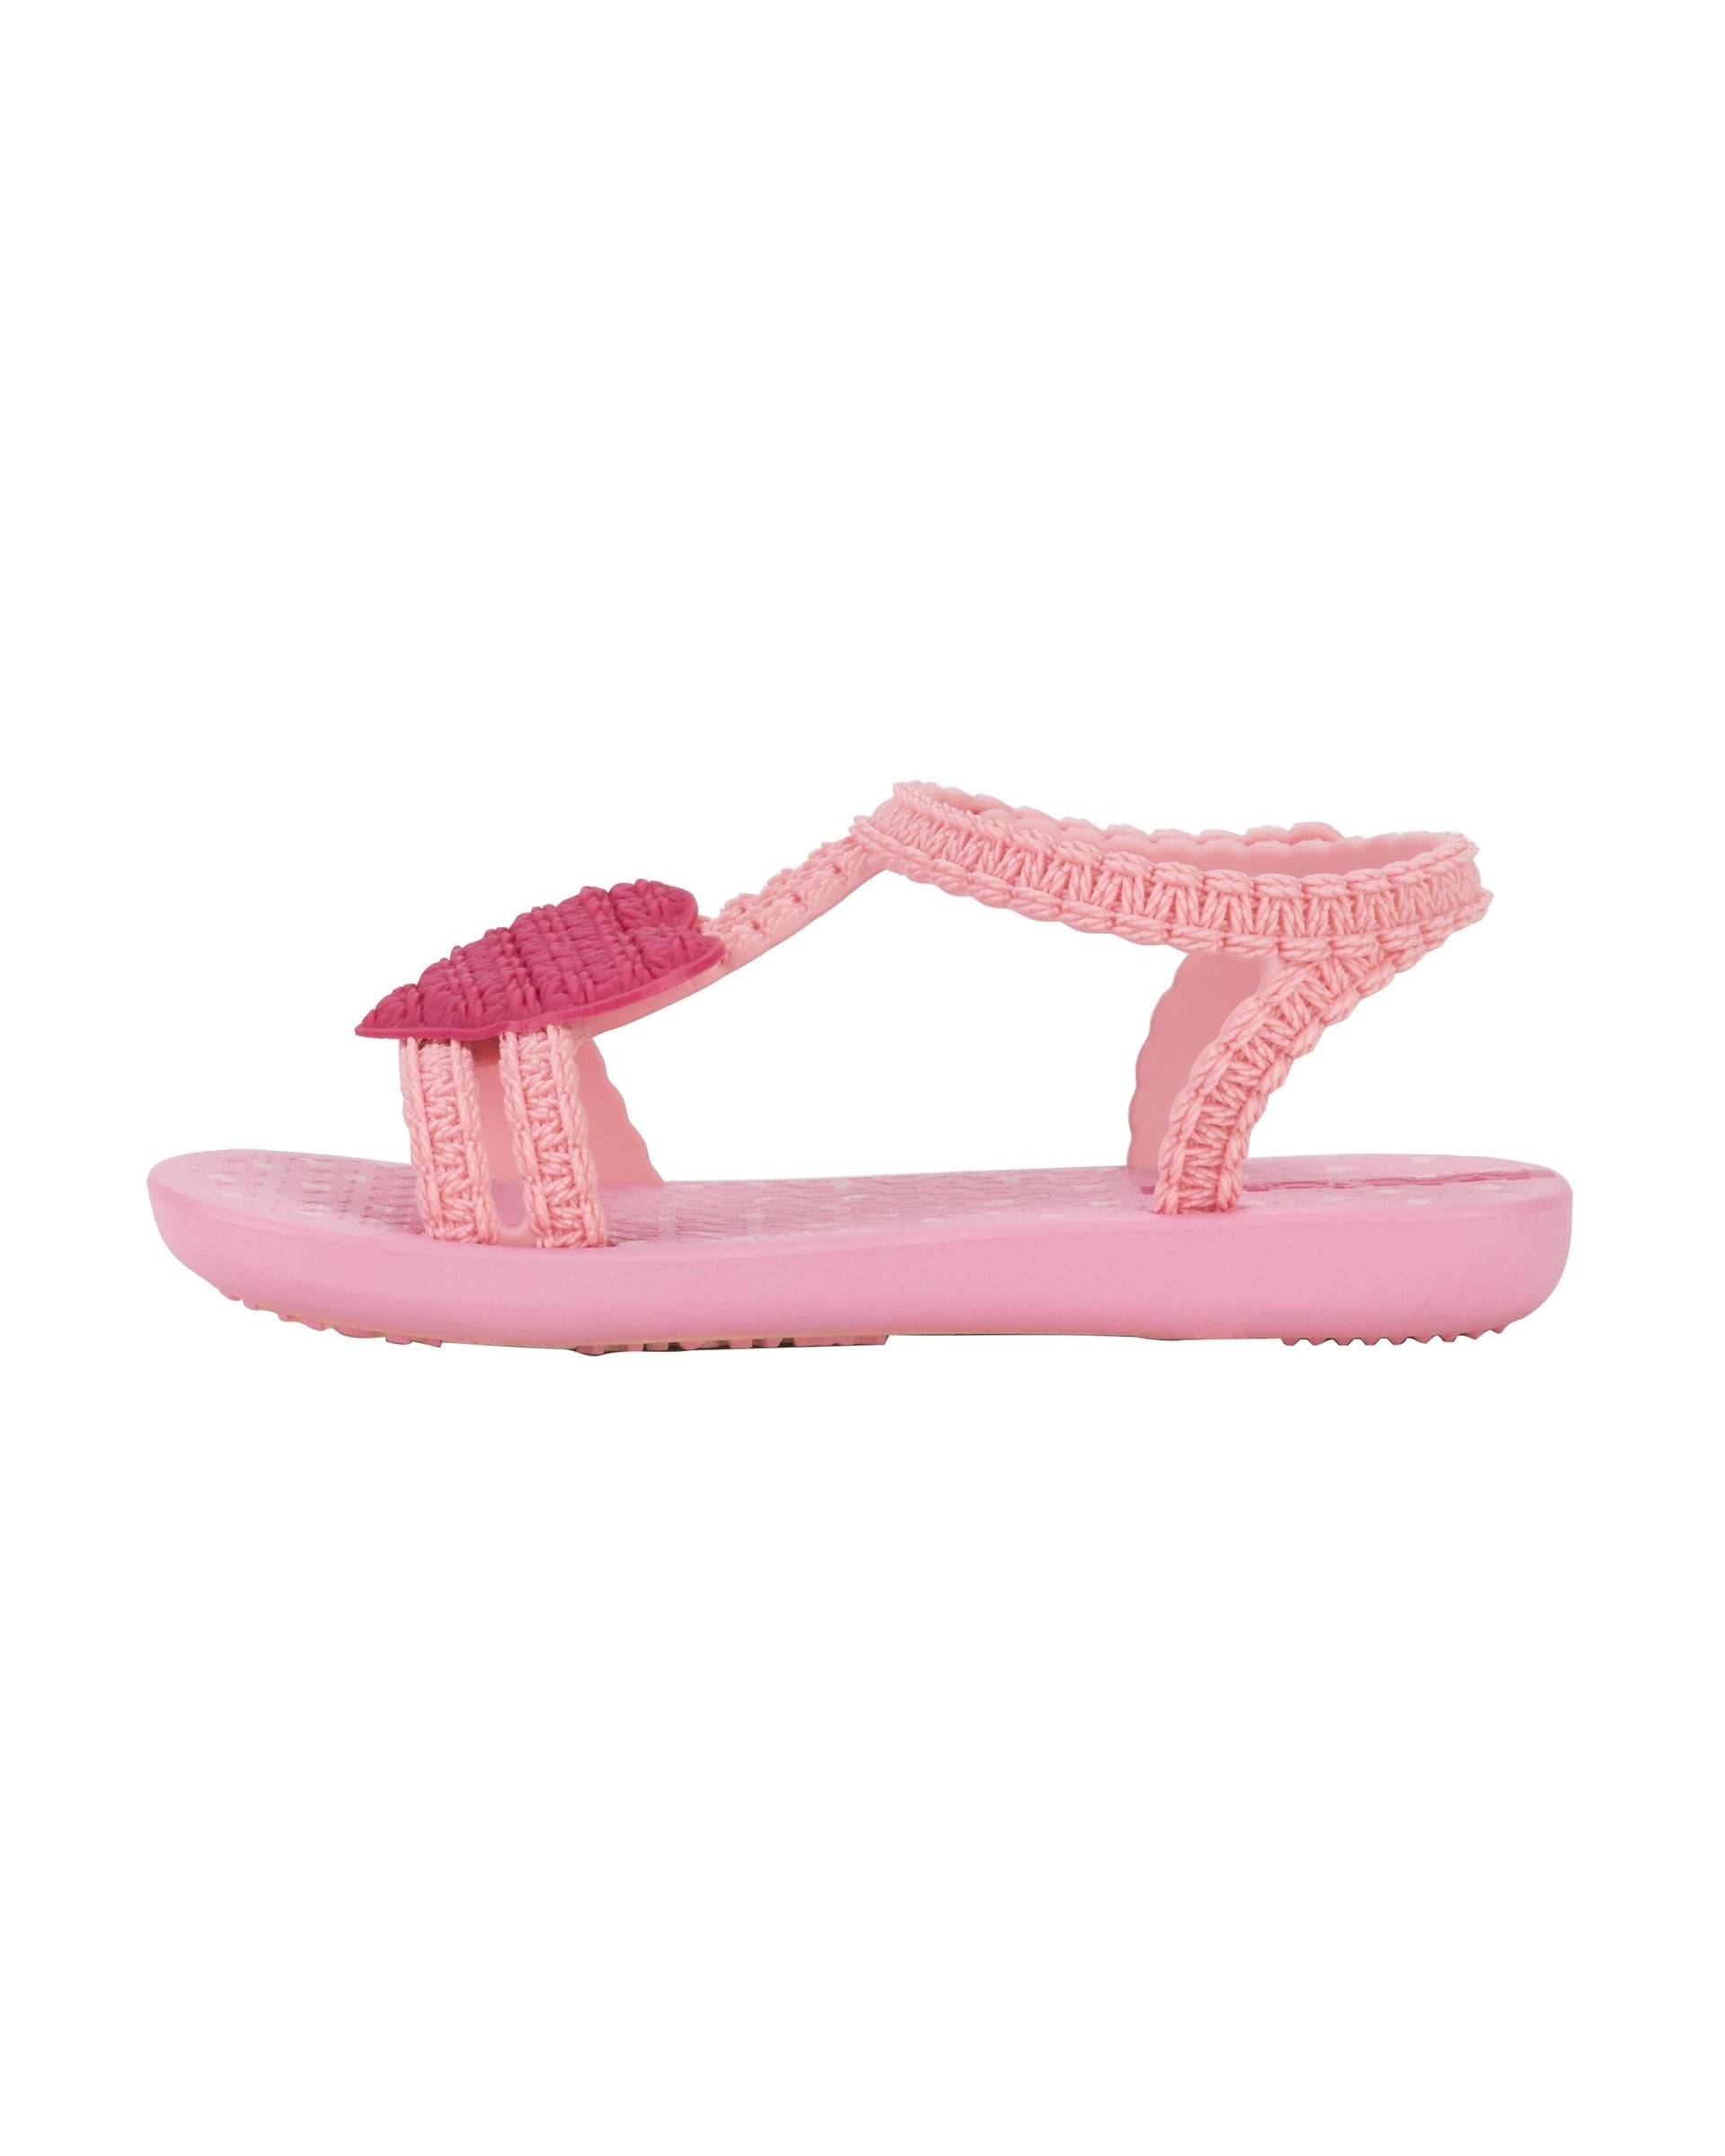 Inner side view of a pink Ipanema My First Ipanema baby sandal with pink heart on top and crochet texture .